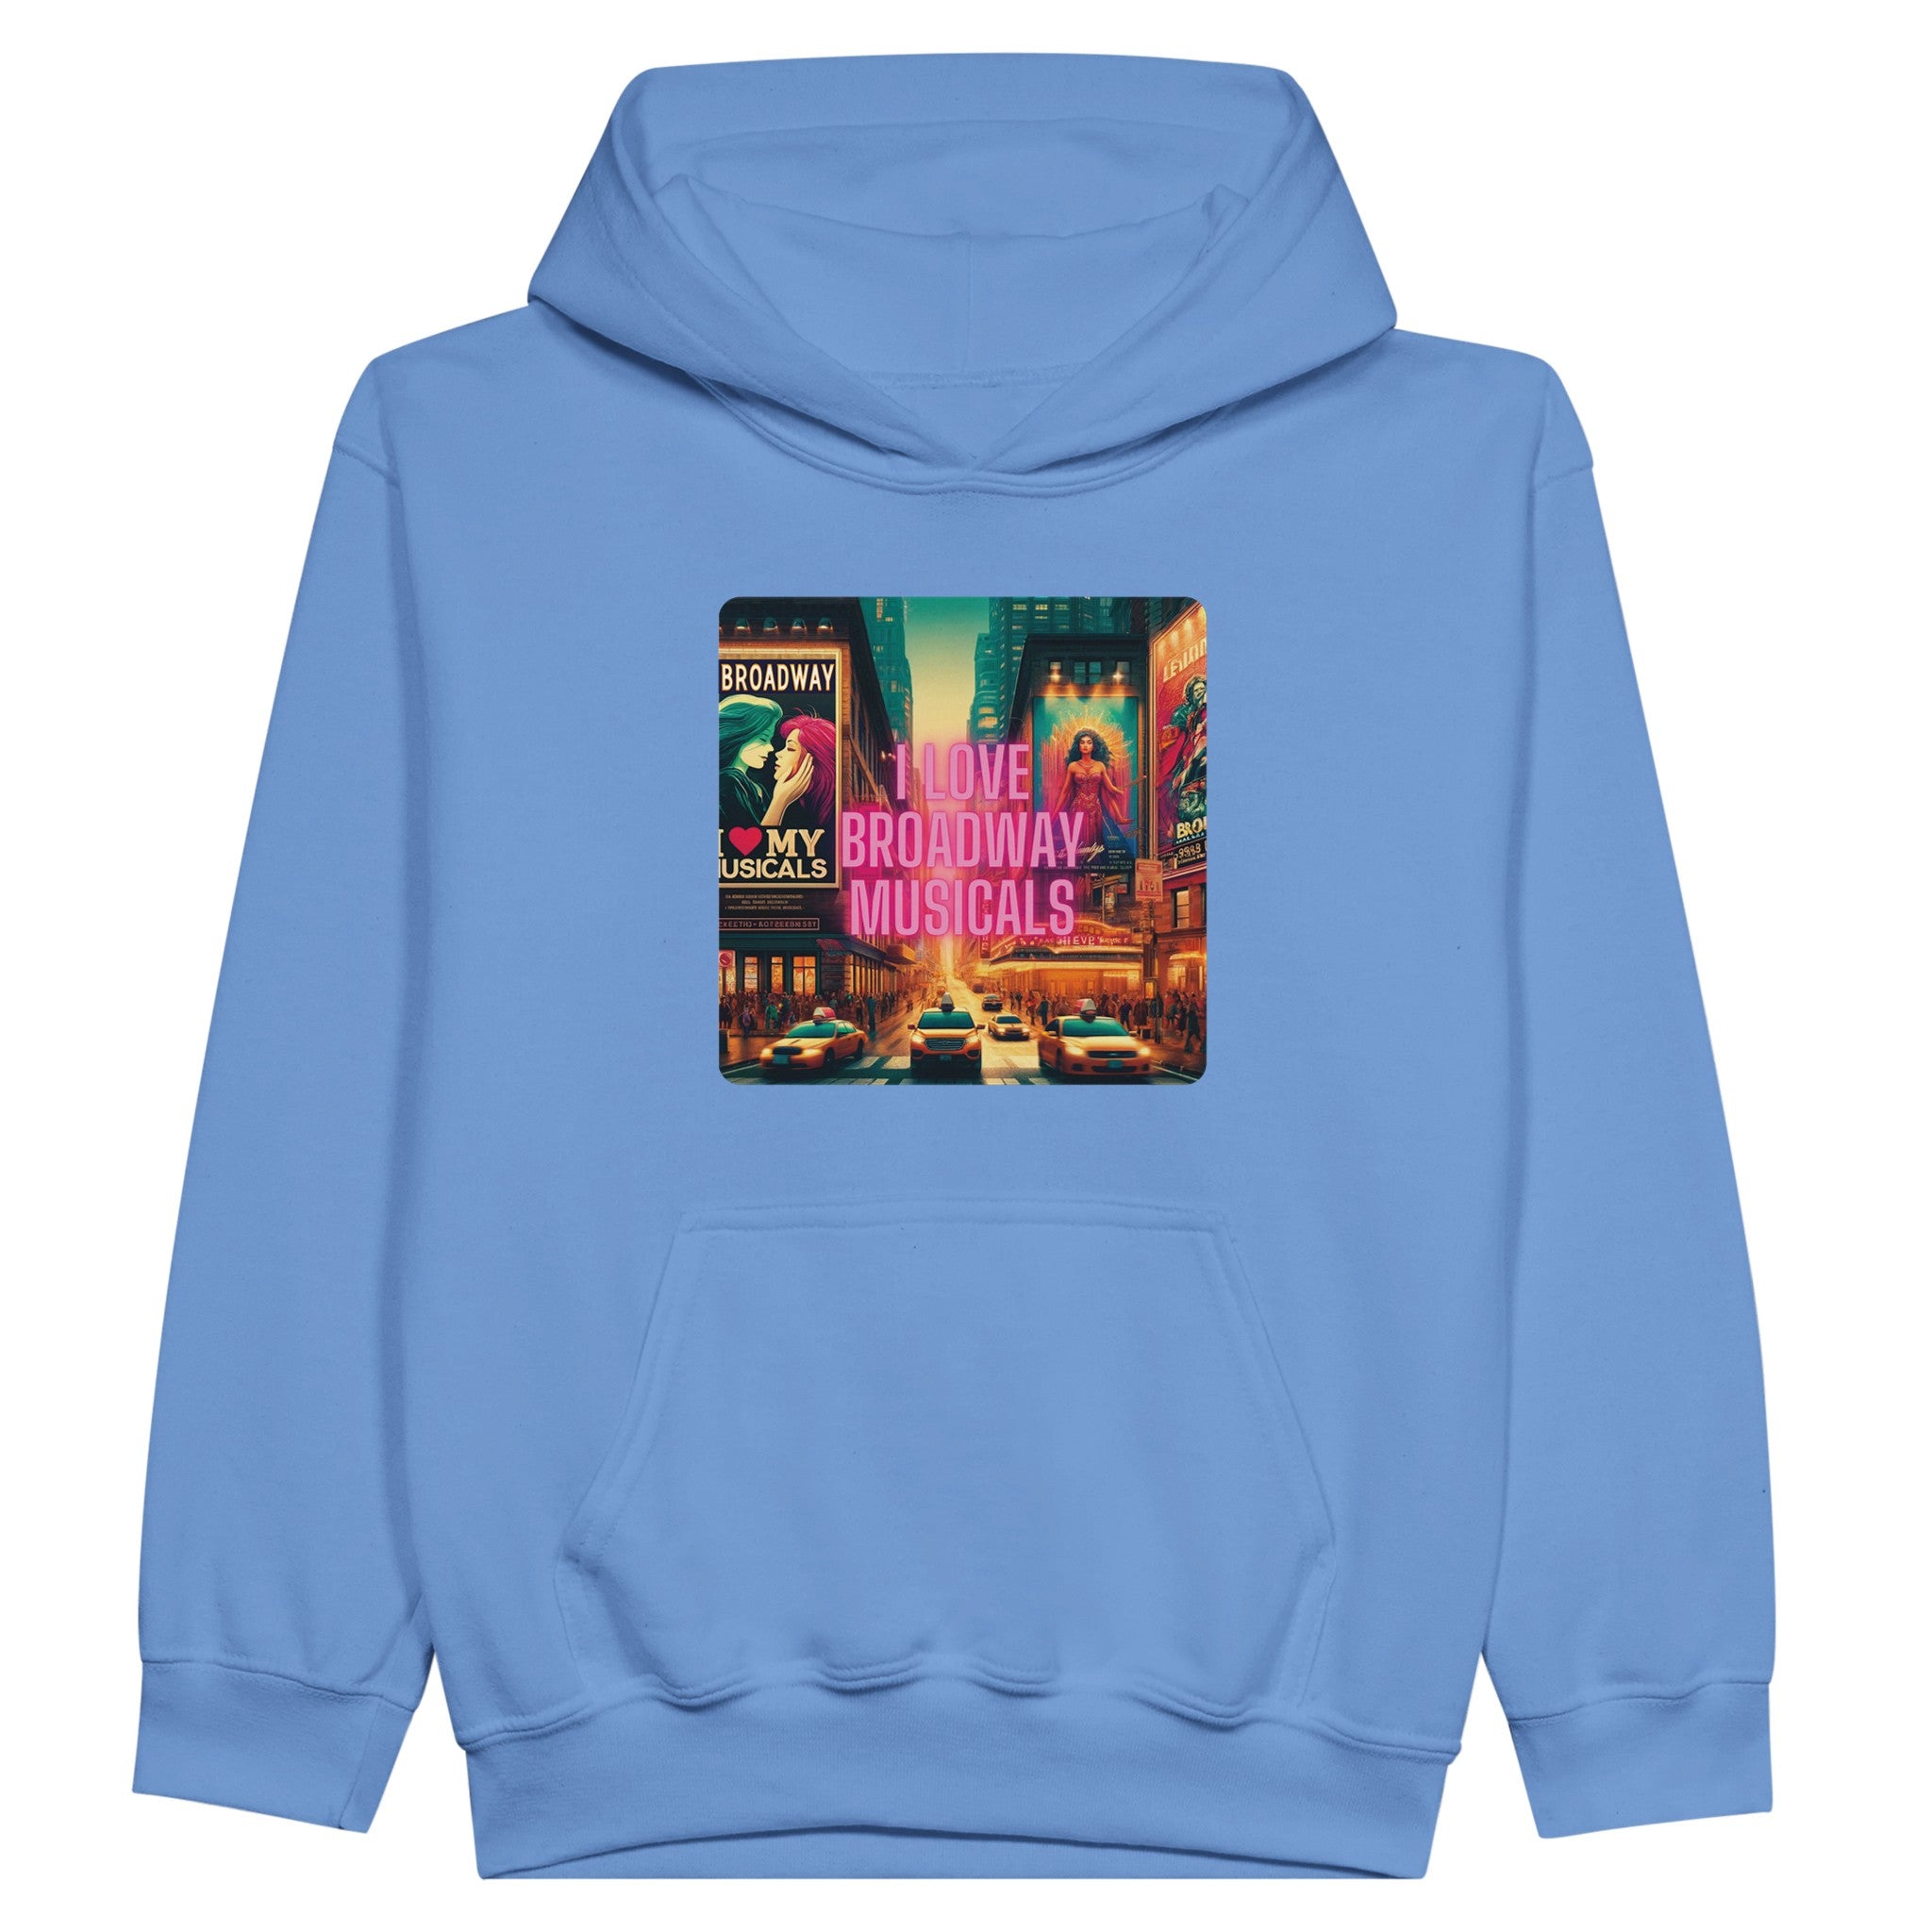 Classic Kids "I Love Broadway Musical" Pullover Hoodie